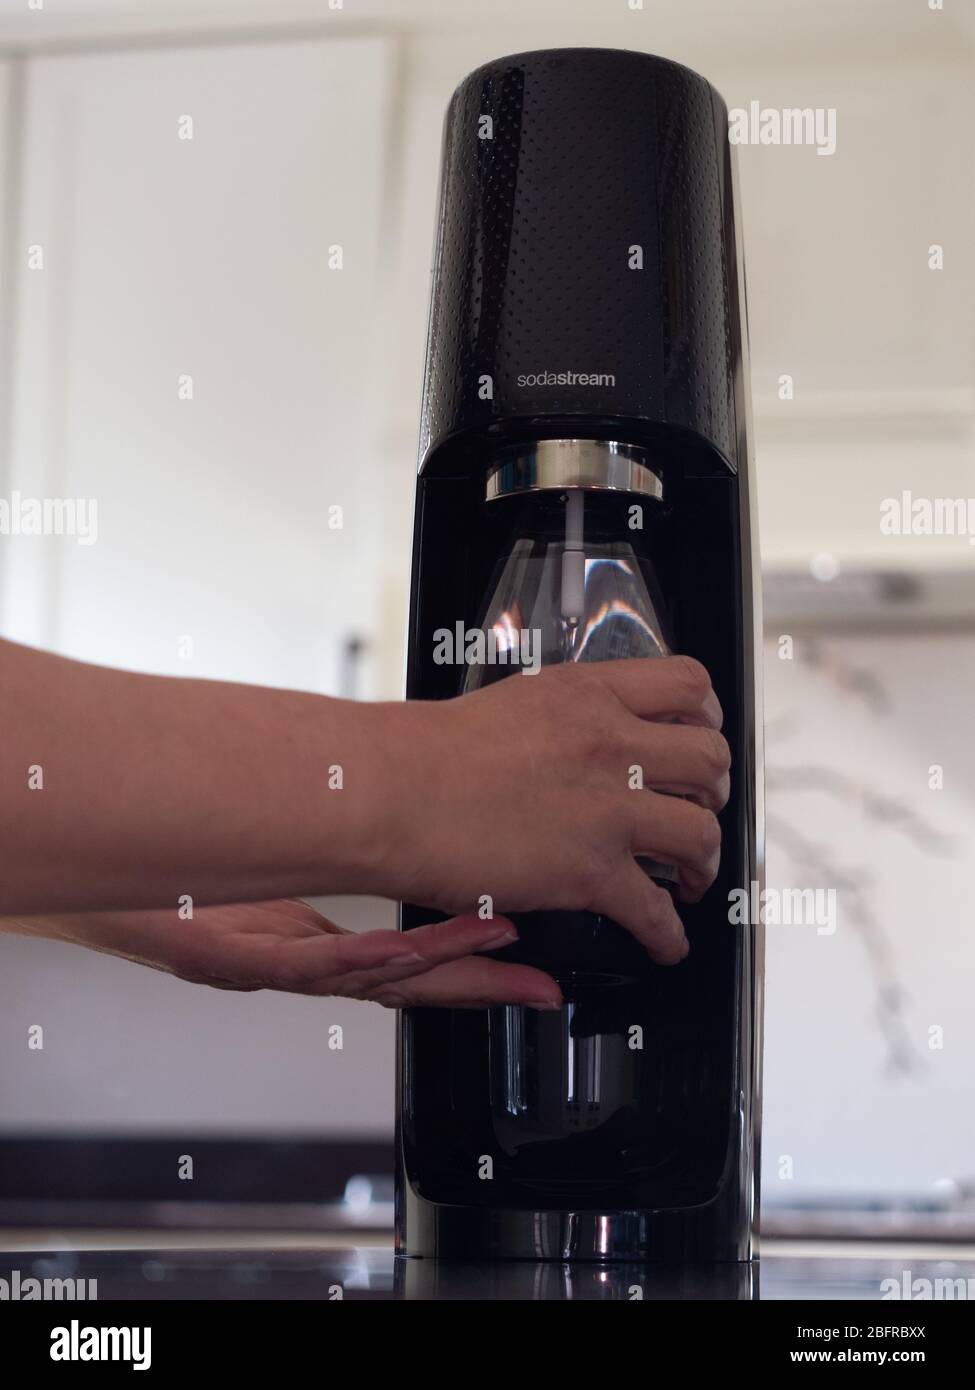 Non-caucasian woman using the Sodastream to carbonate water in a reusable plastic bottle in a modern kitchen with off white cabinets in the background Stock Photo